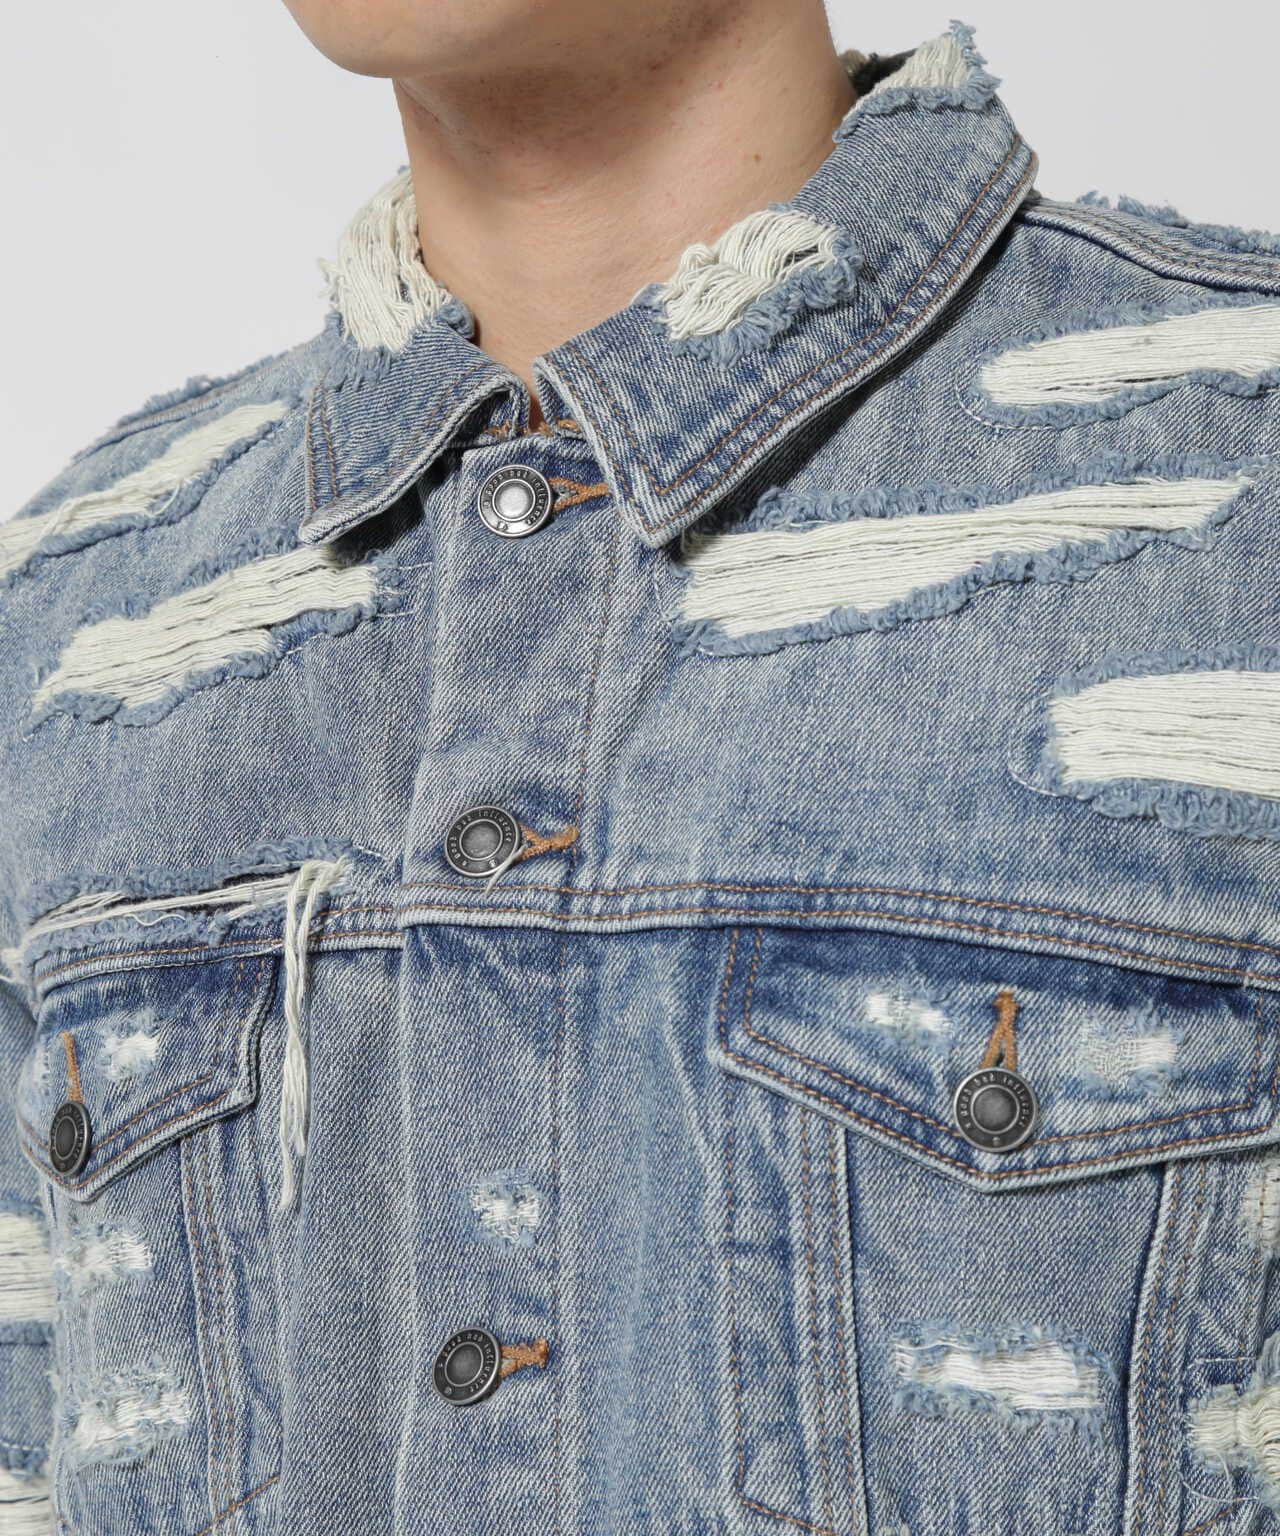 A GOOD BAD INFLUENCE/REPAIRED DENIM JACKET